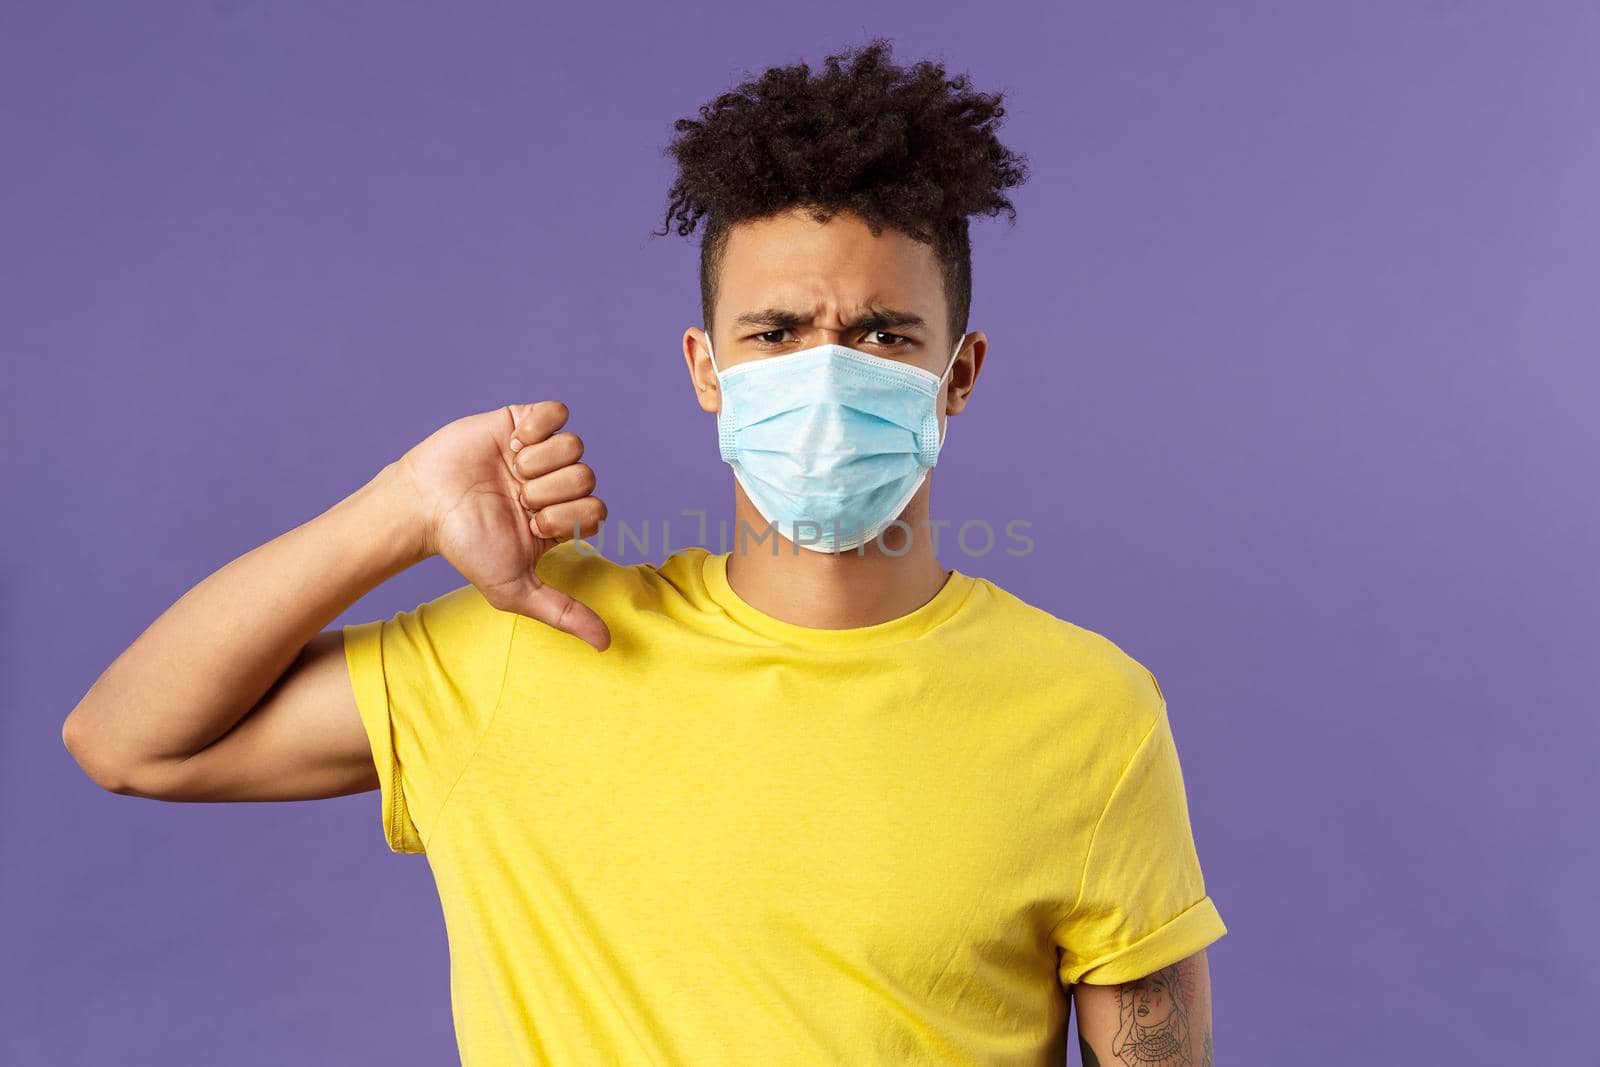 Medicine, covid19, coronavirus and people concept. Close-up portrait of displeased young man disapprove person ignores social distancing protocol, show thumbs-up, think its bad, purple background.